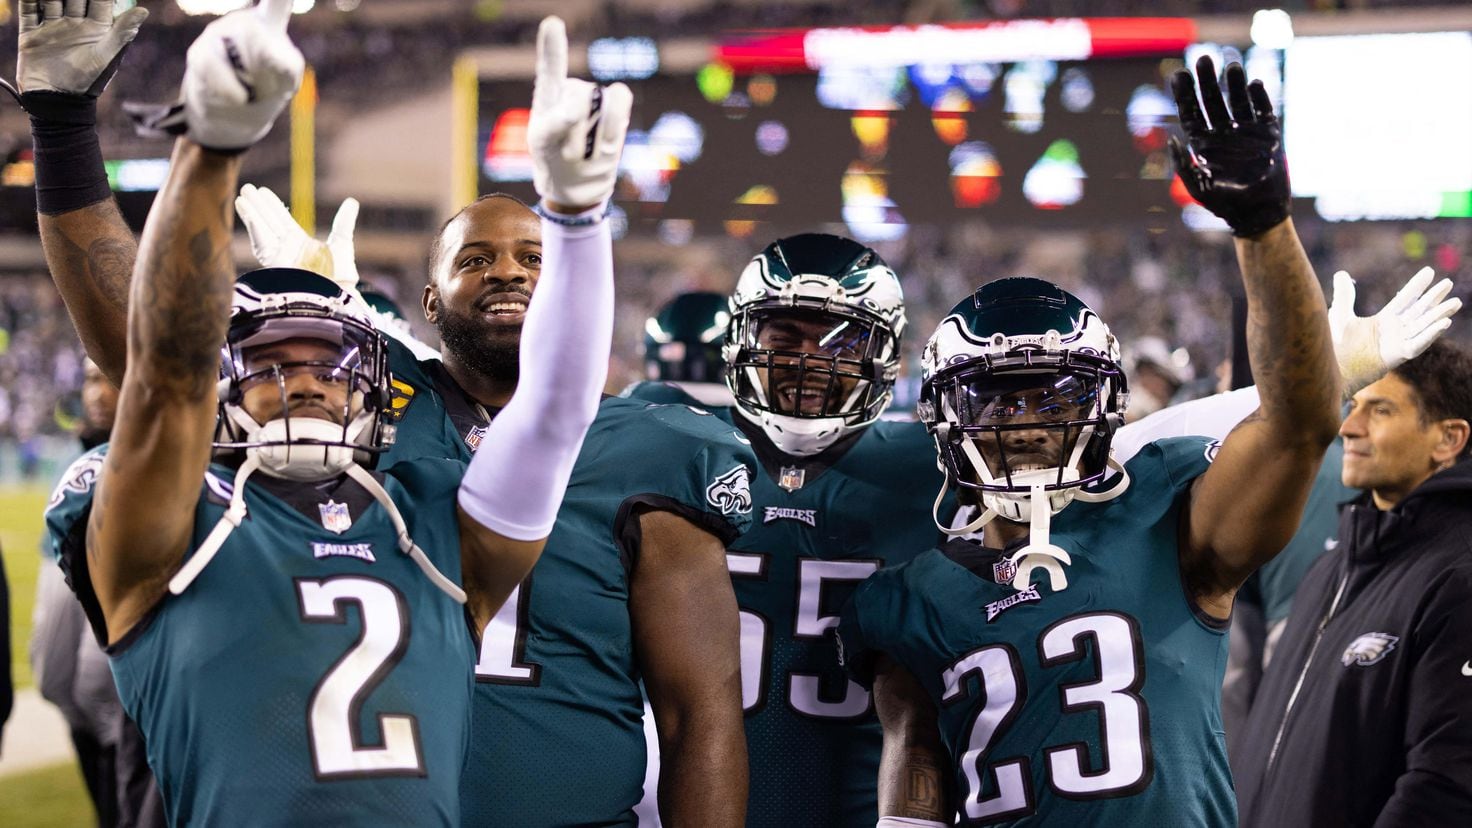 The Philadelphia Eagles are NFC Champs! Celebrate by getting